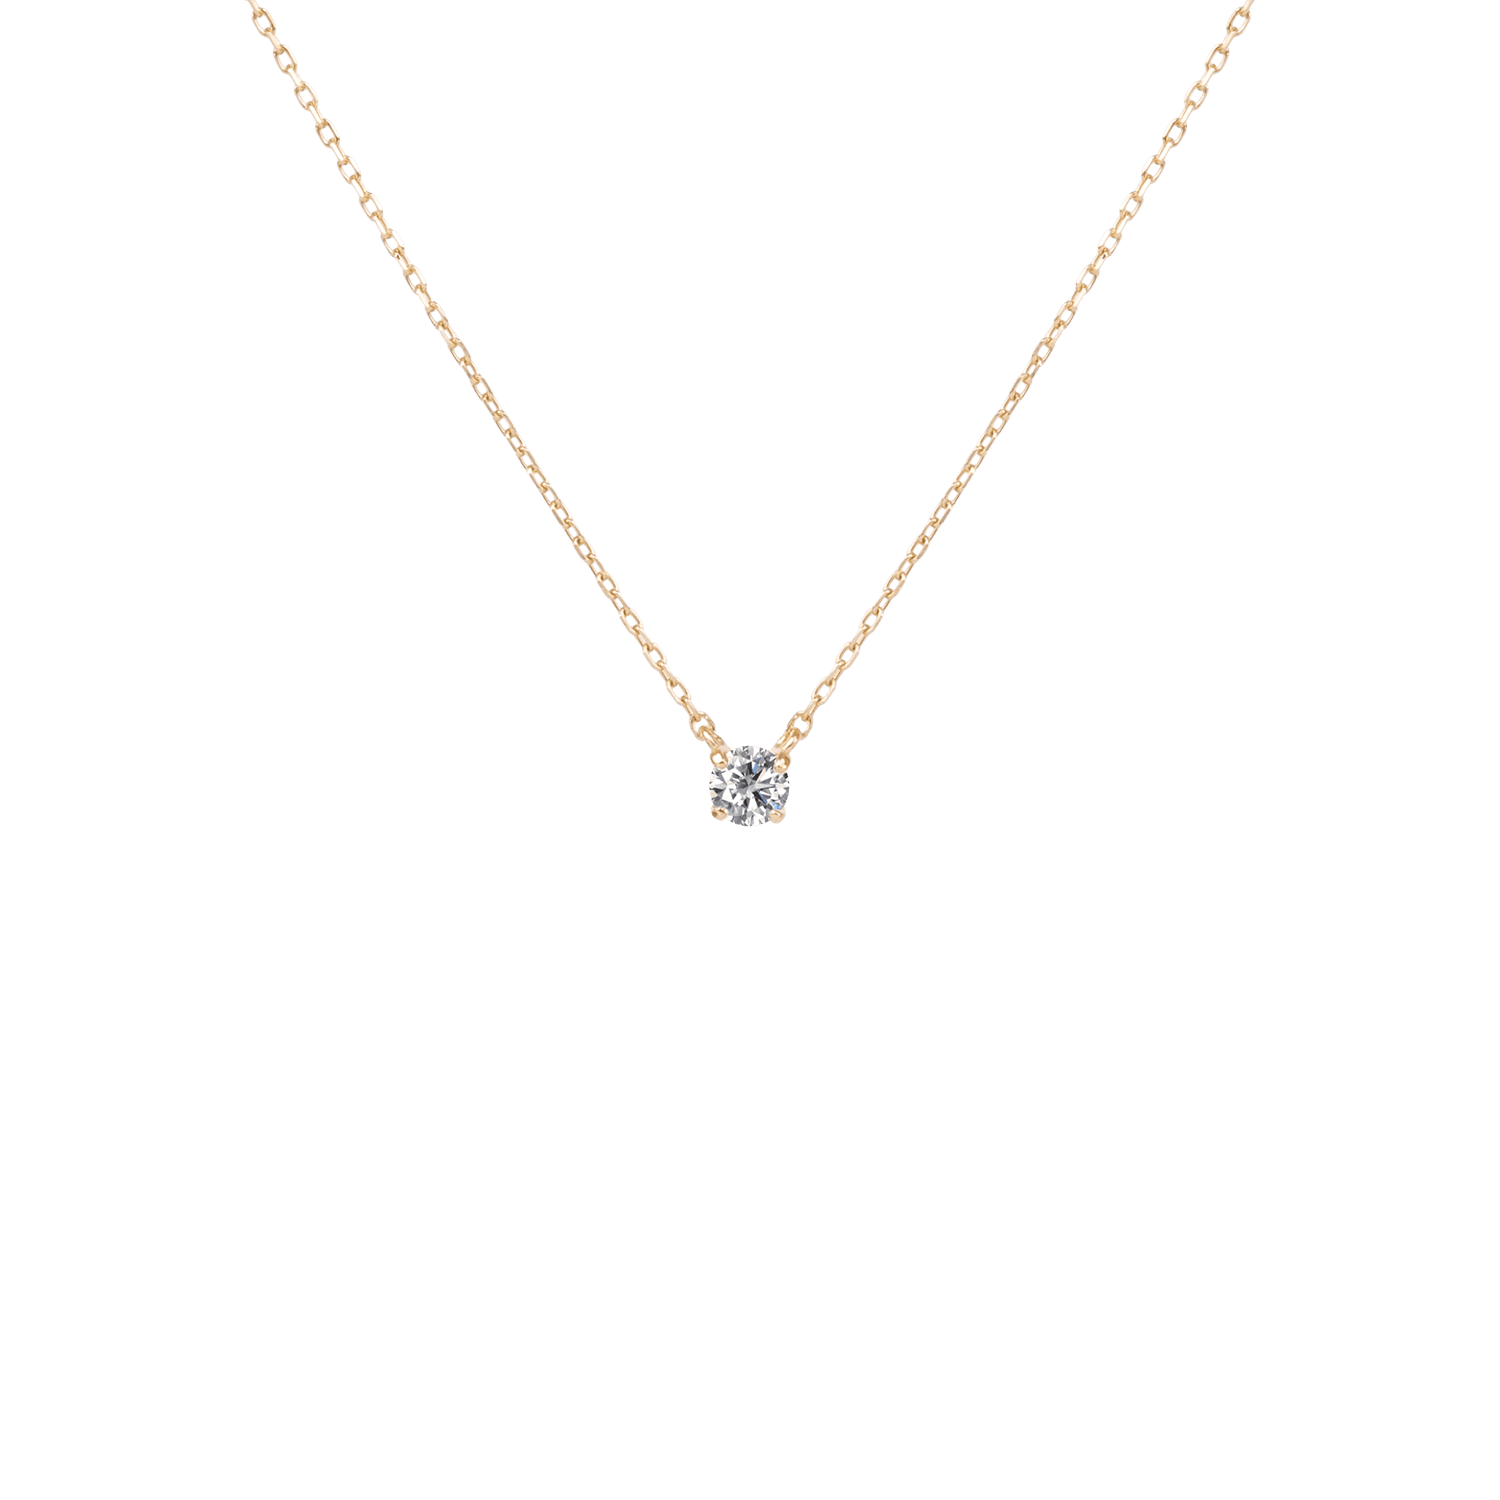 Solitaire Lab-Grown Diamond Necklace | 18K yellow gold / Chain le